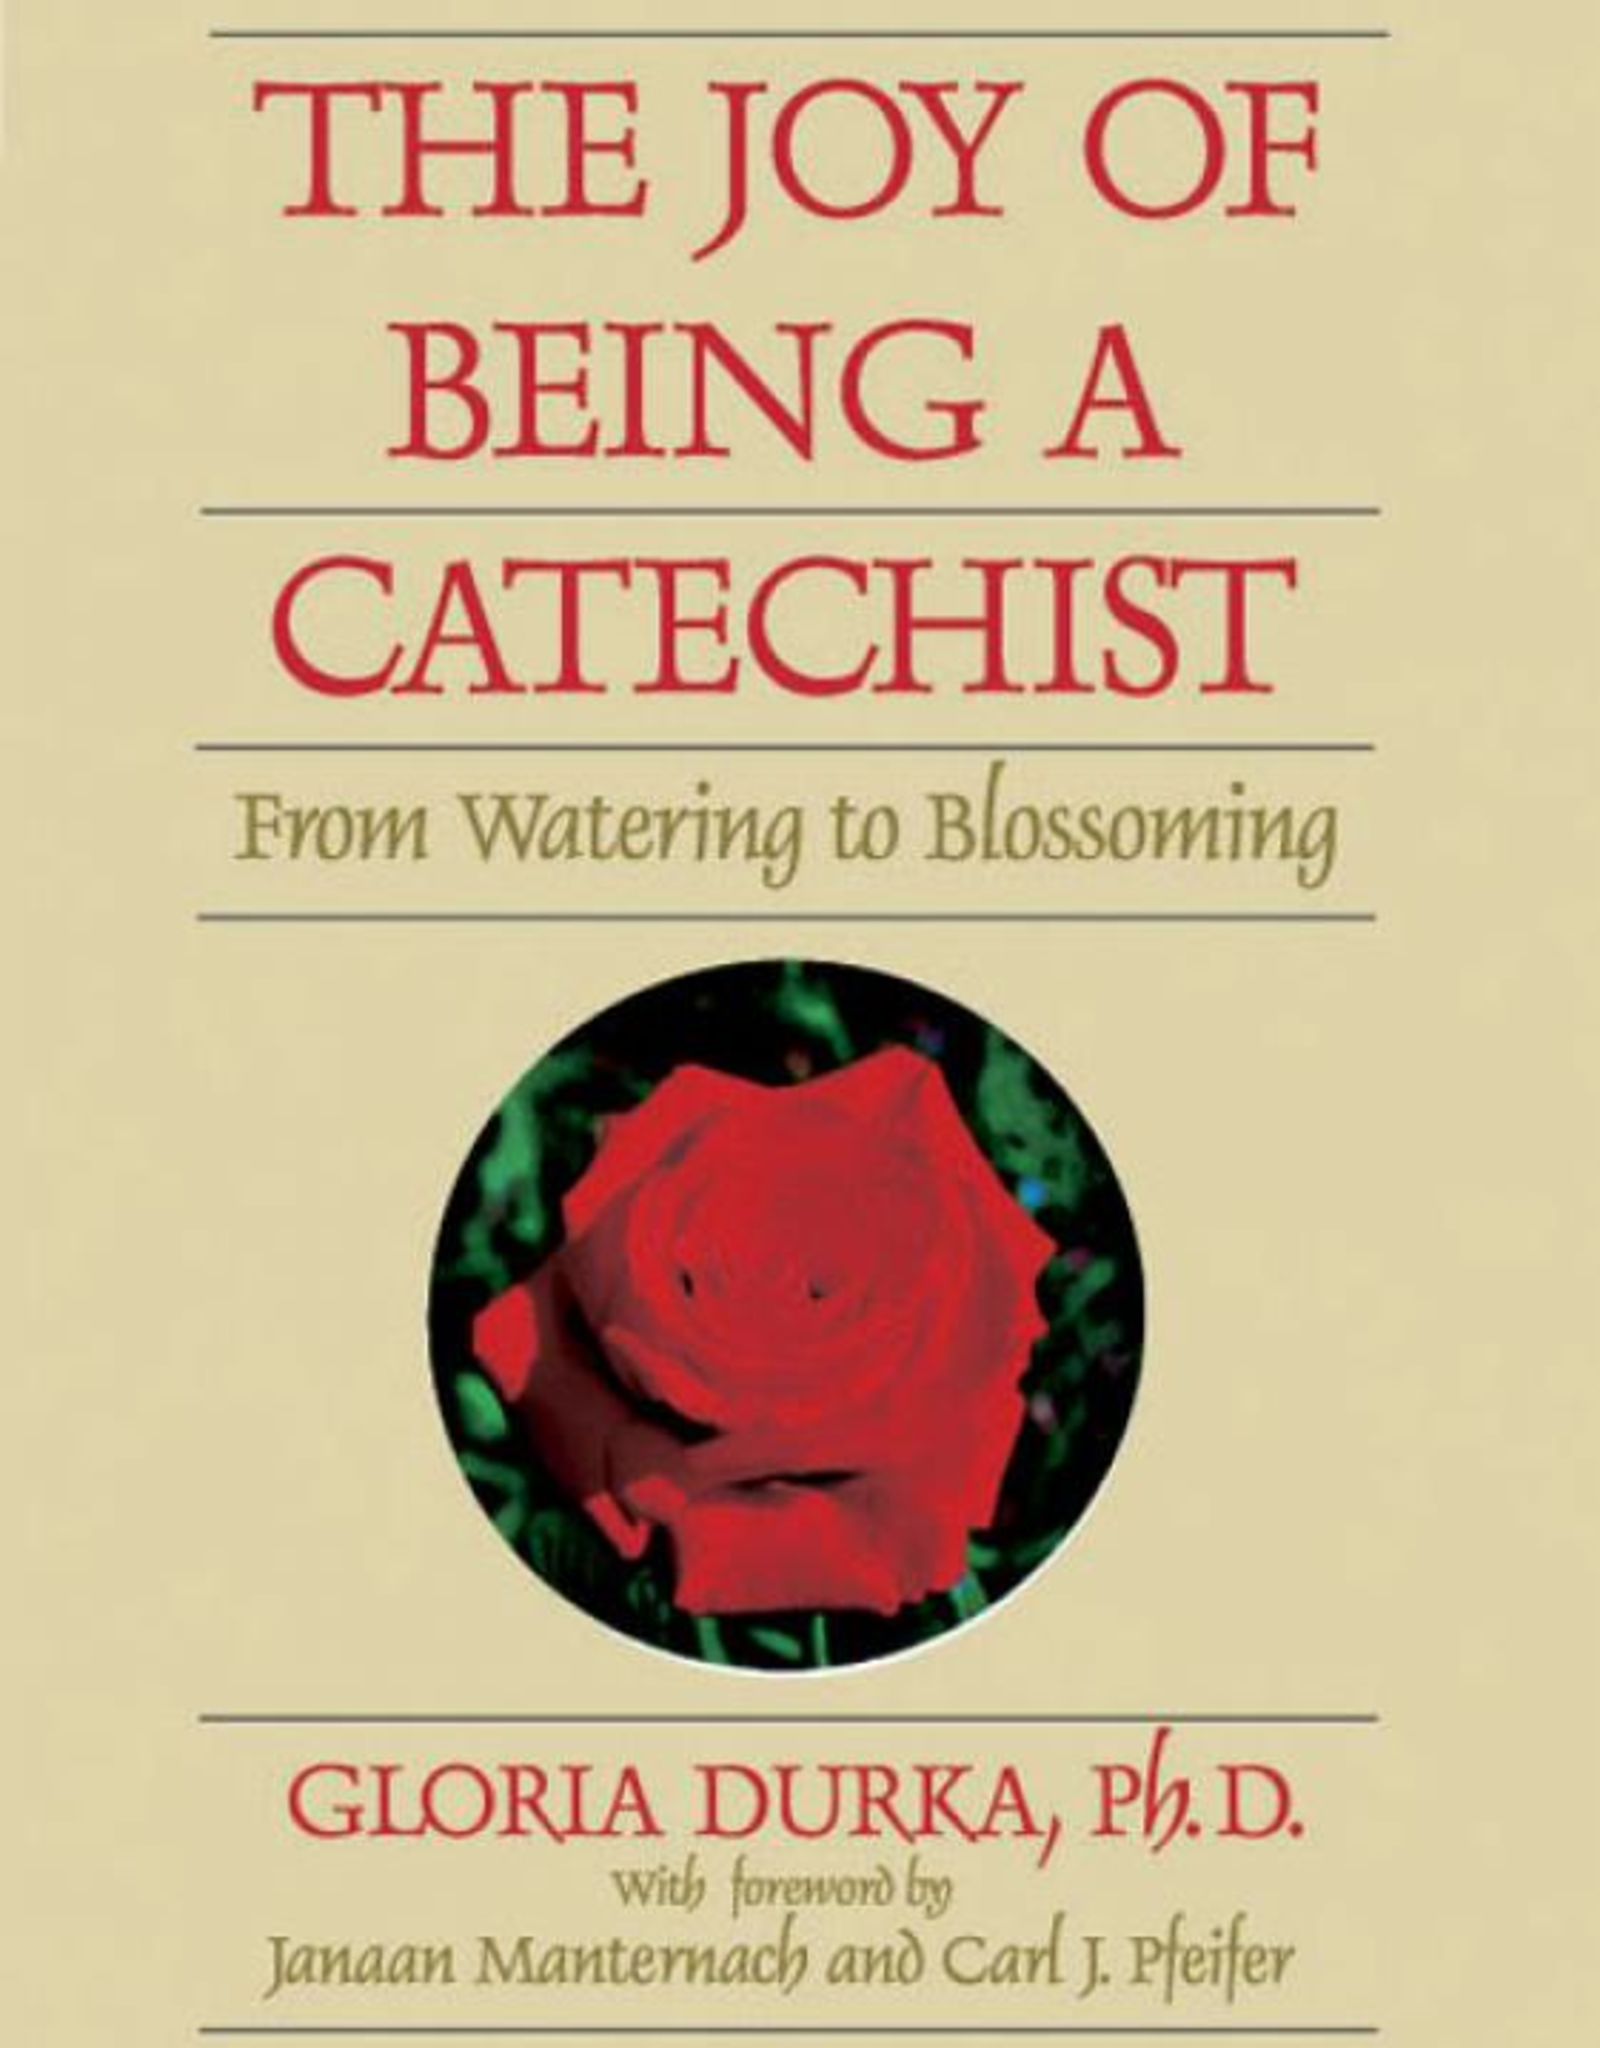 Catholic Book Publishing The Joy of Being a Catechist, by Gloria Durka